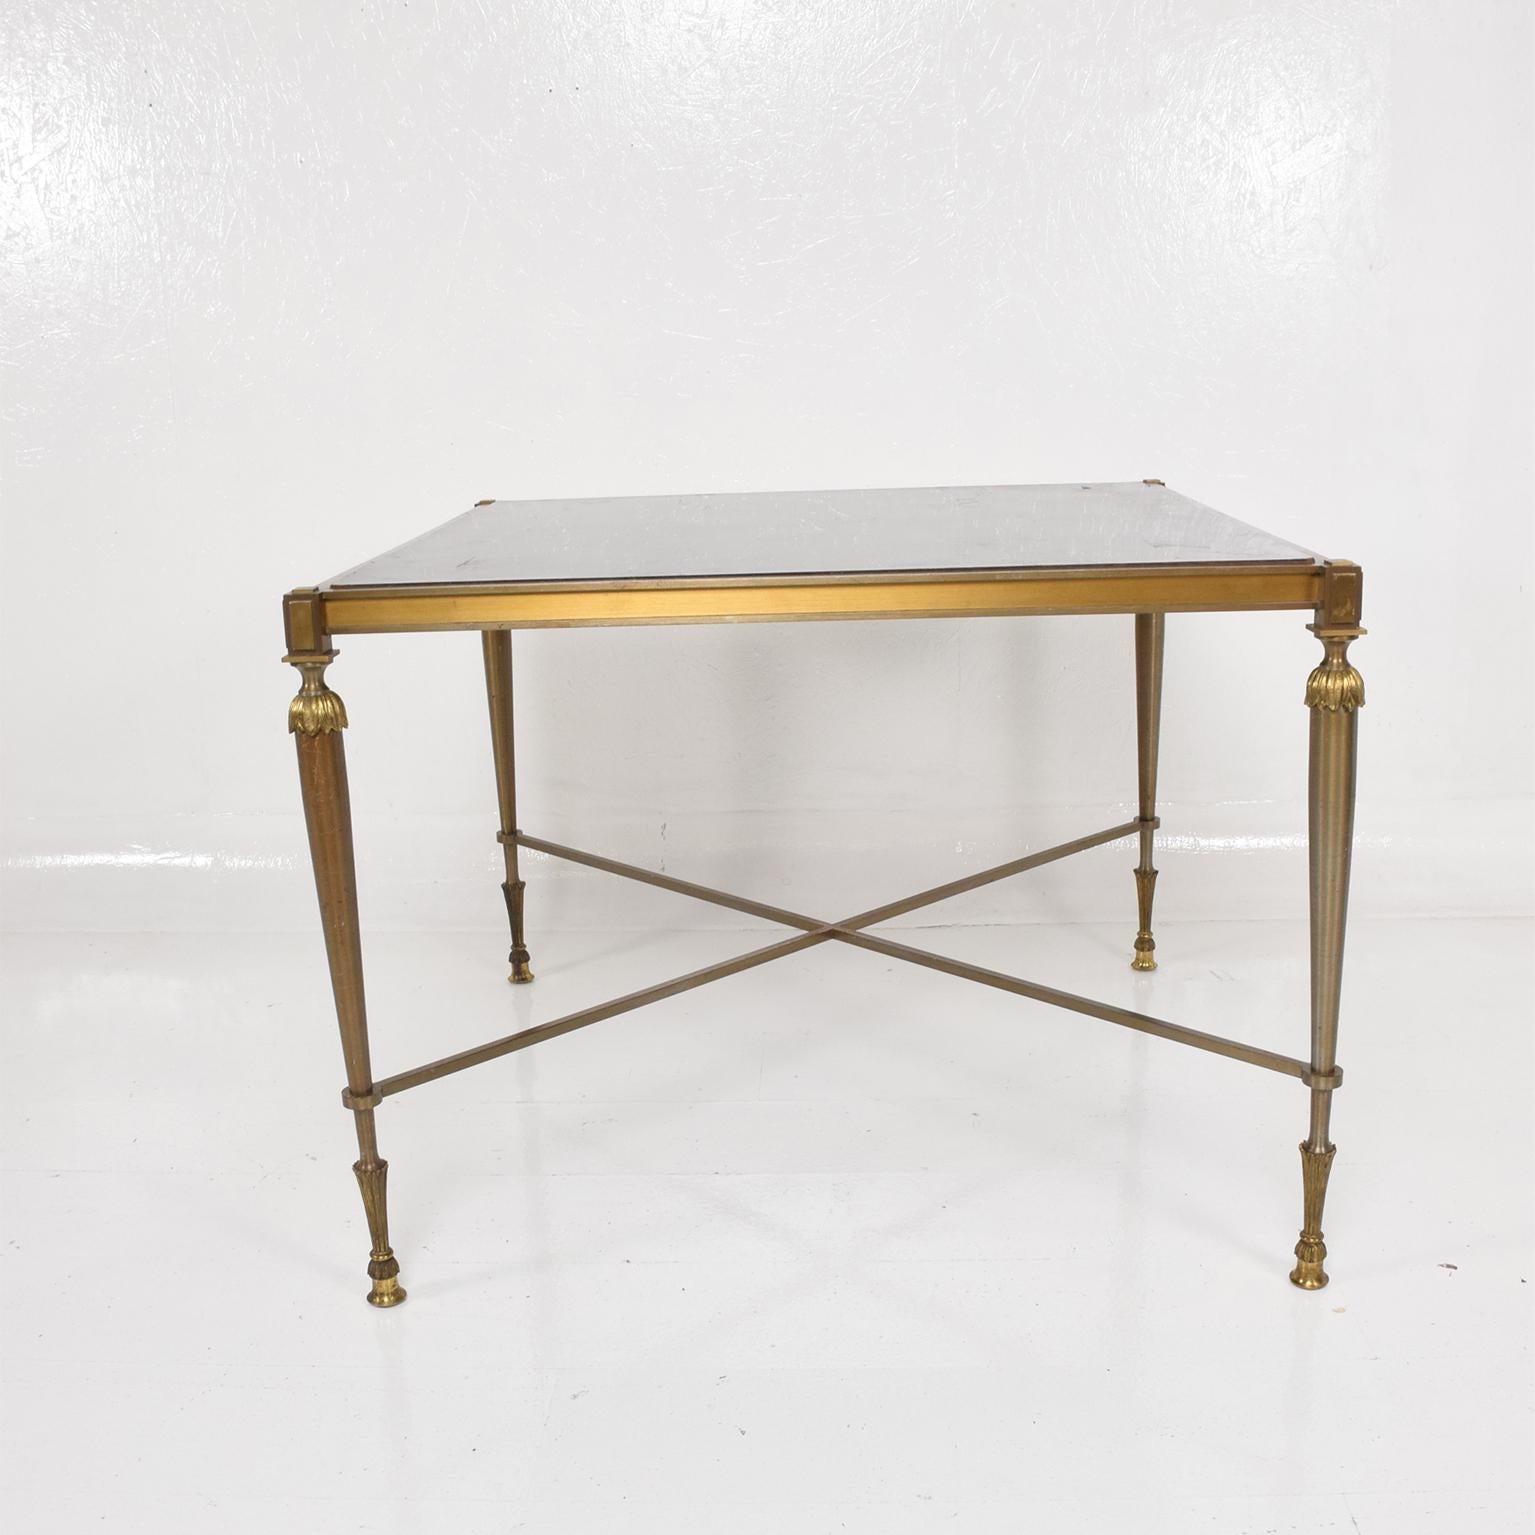 For your consideration, a Mexican Modernist Neoclassical Game Table Attr Arturo Pani.
Beautiful construction with brass and stainless steel.
The reversive top has a black Formica in one side and black leather on the opposite side. 
Dimensions:37